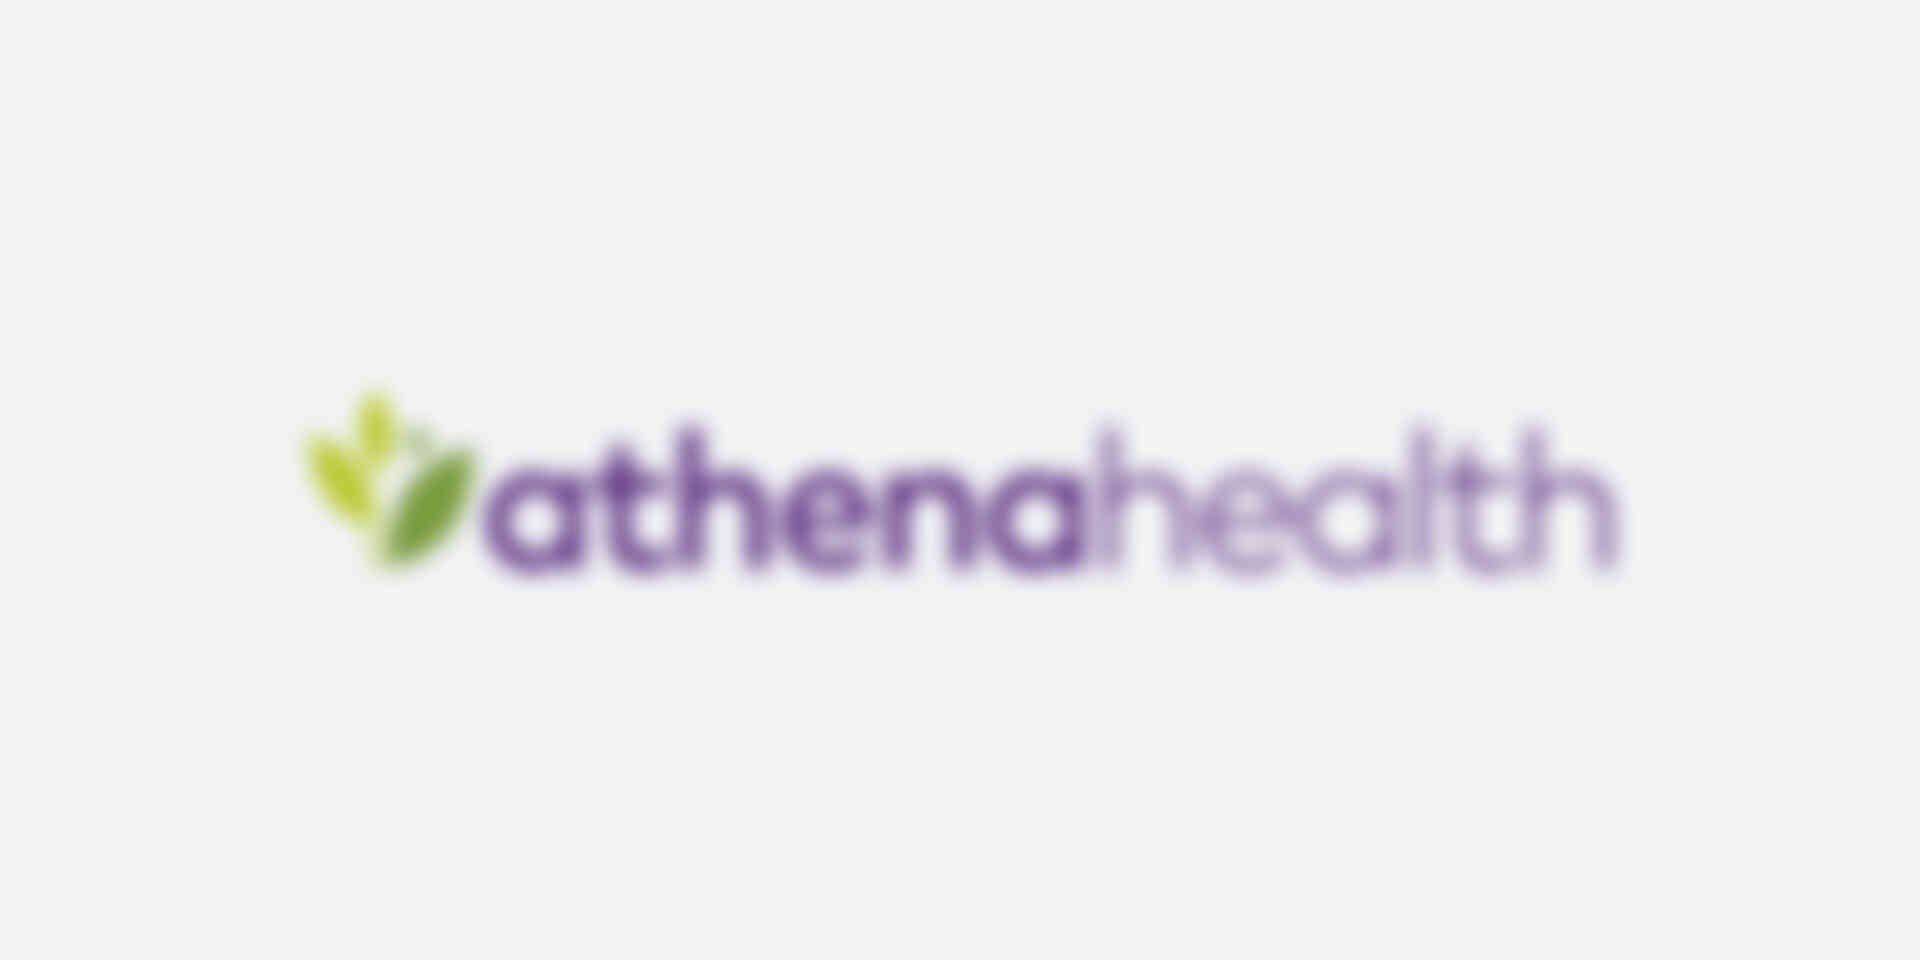 Our clients - healthcare-athenahealth